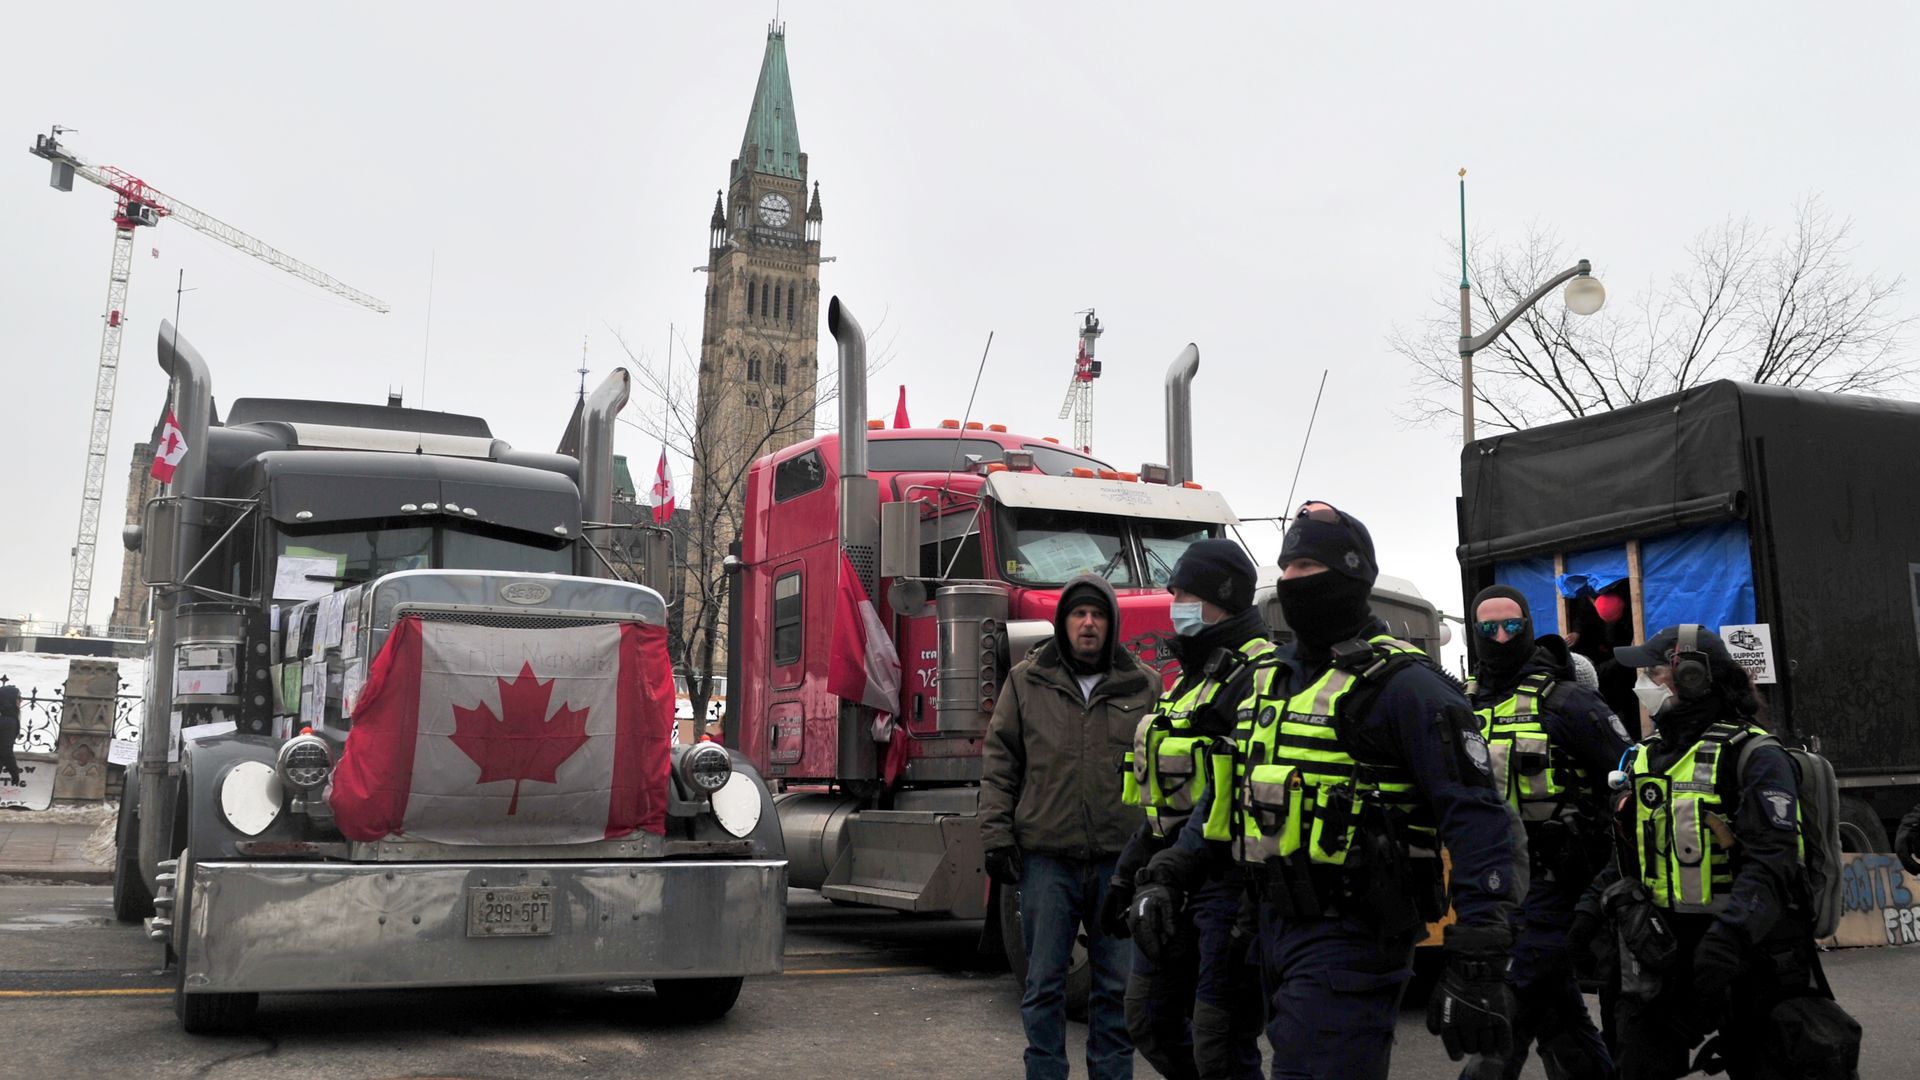 Police patrol near the parliament during a protest in Ottawa, Canada on February 11, 2022